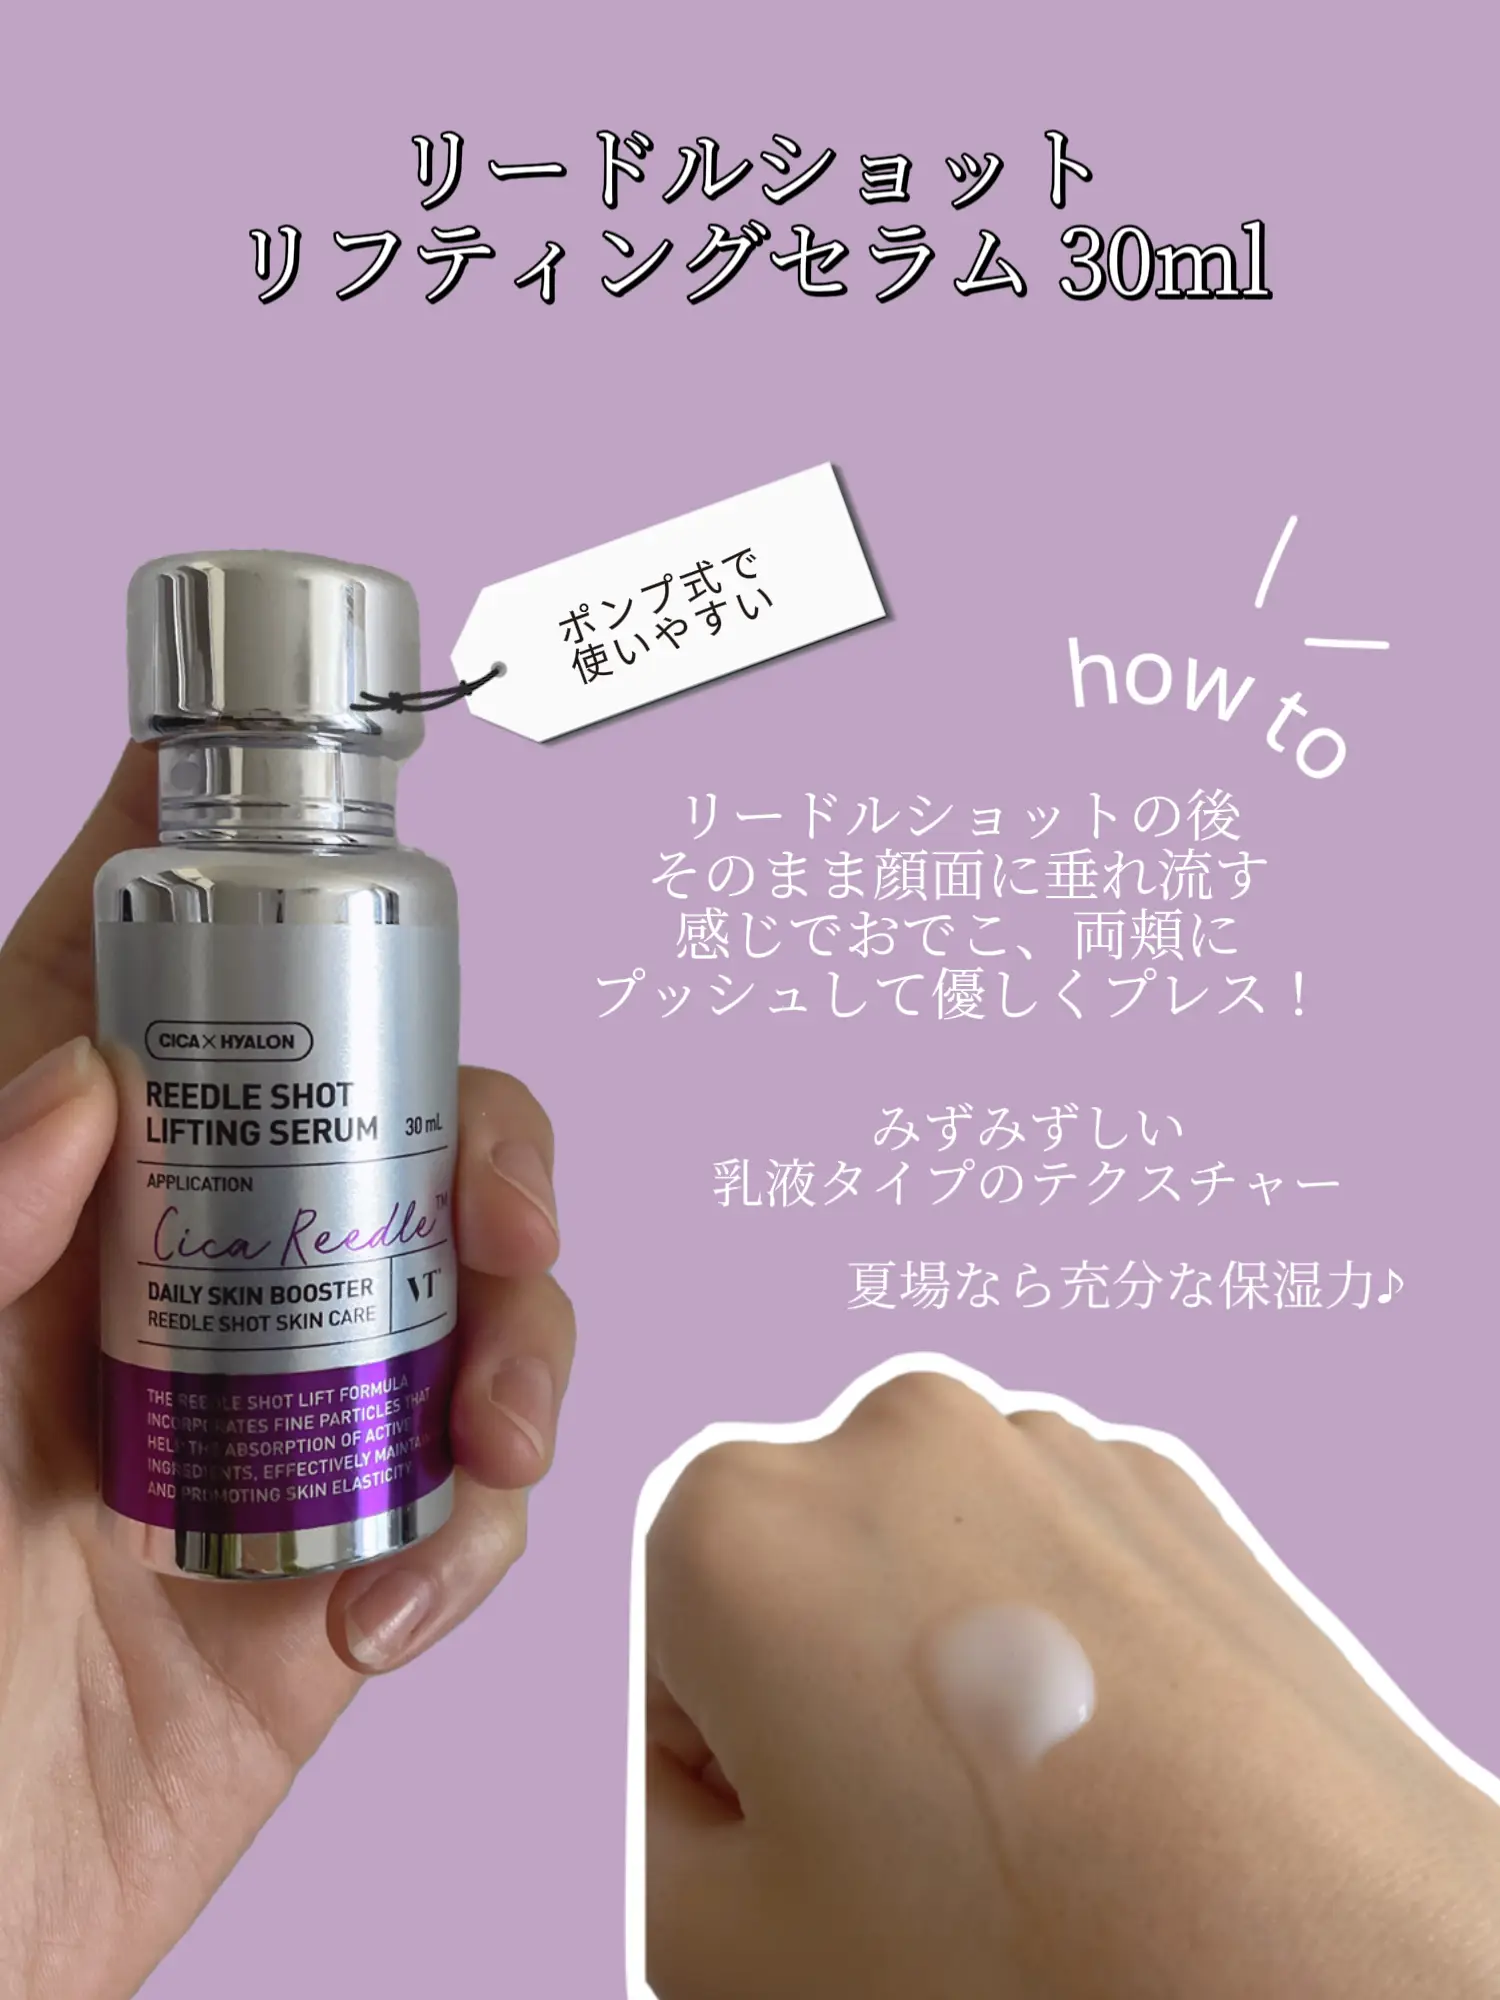 Sagging] I bought this because my skin lacks elasticity [VT new